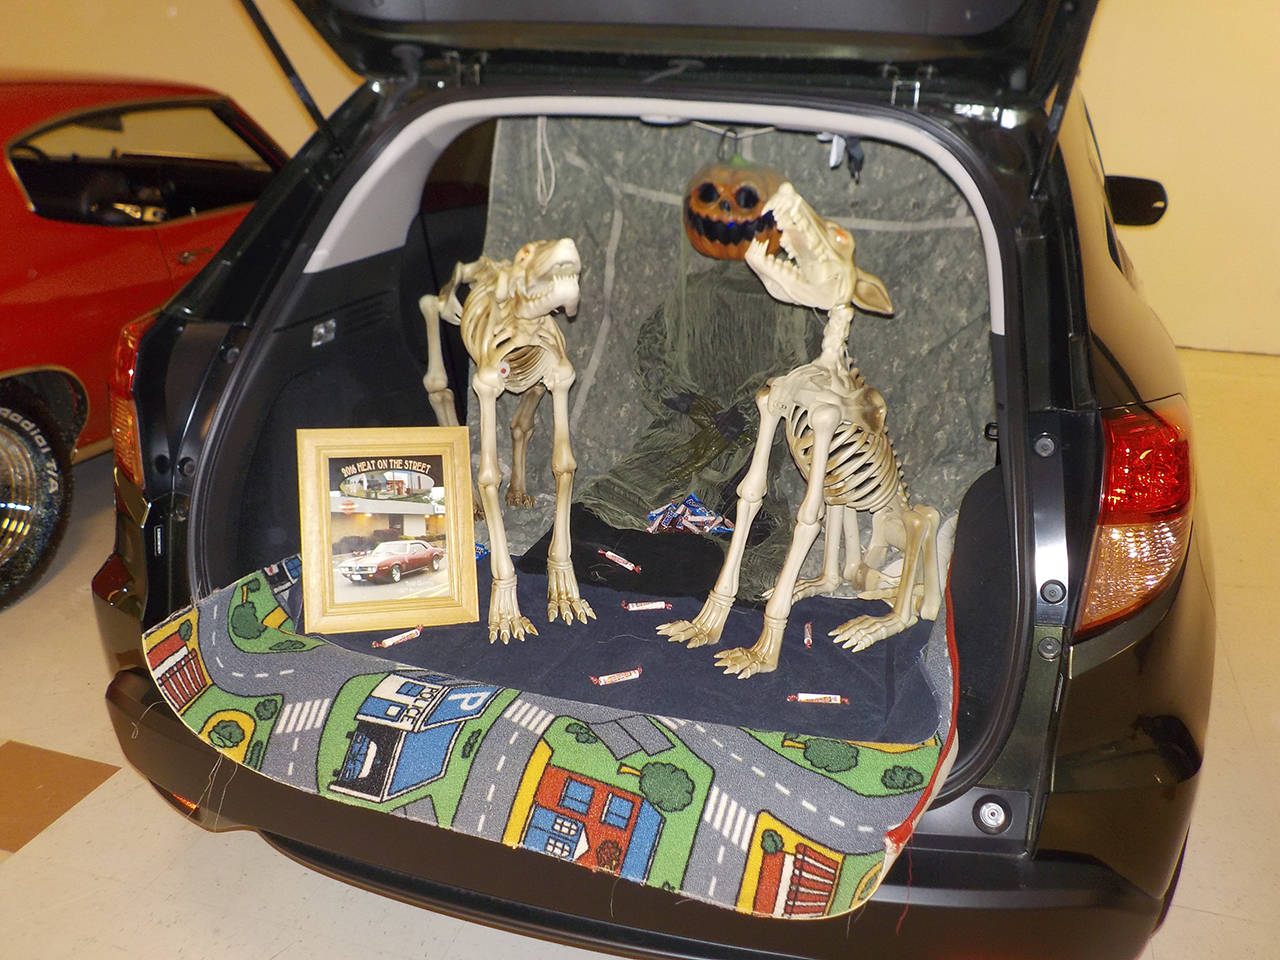 Todd Quimby displayed two dog skeletons that barked, growled and howled in the back of his SUV.